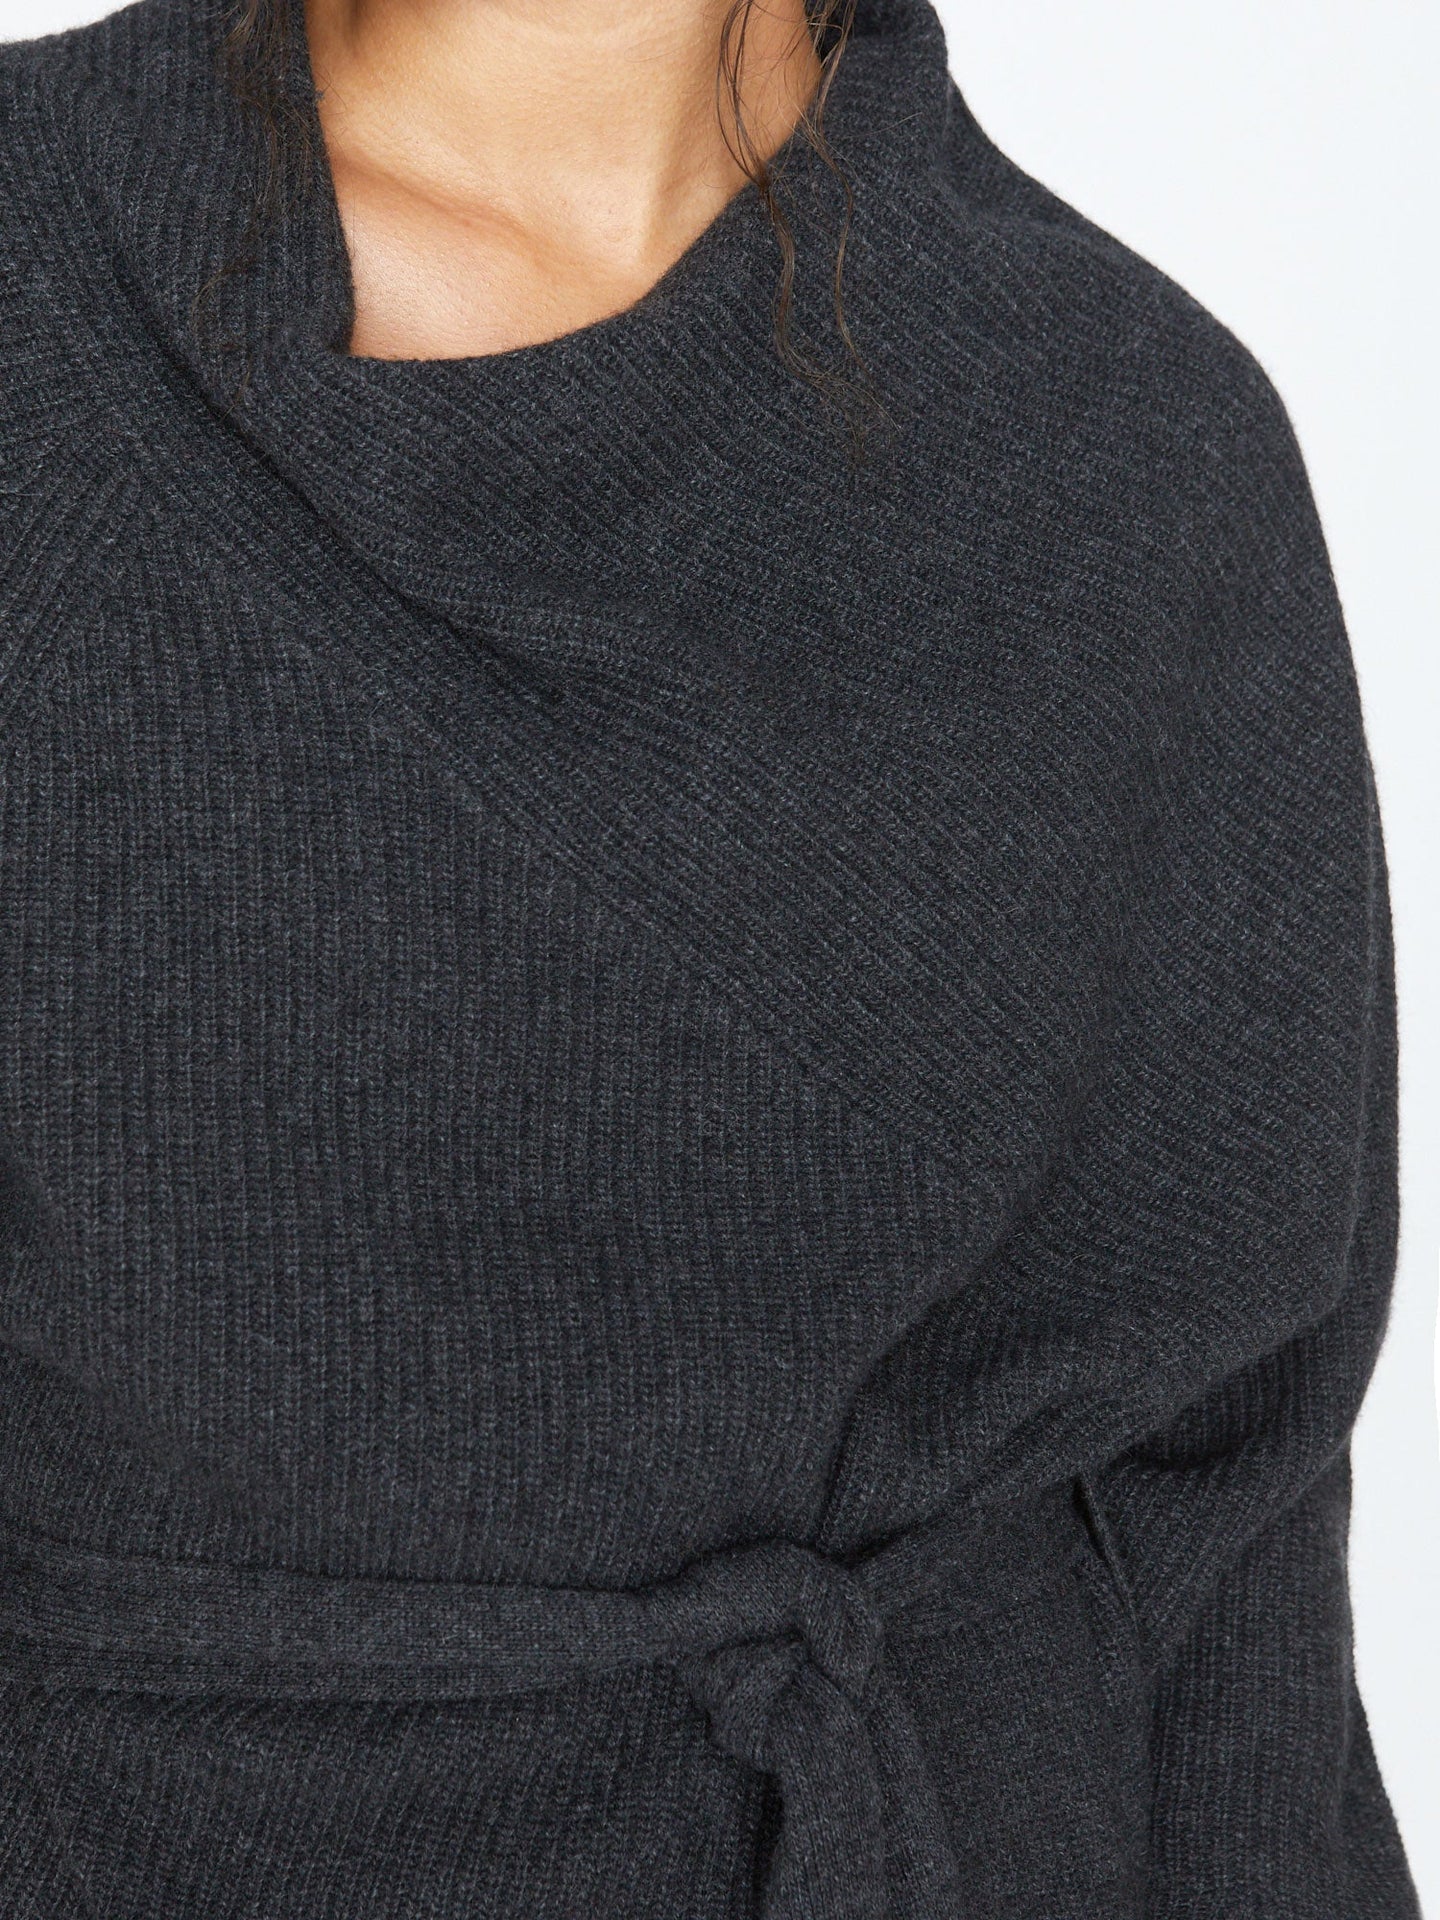 Women's Leith Cowl Neck Sweater, Dark Charcoal